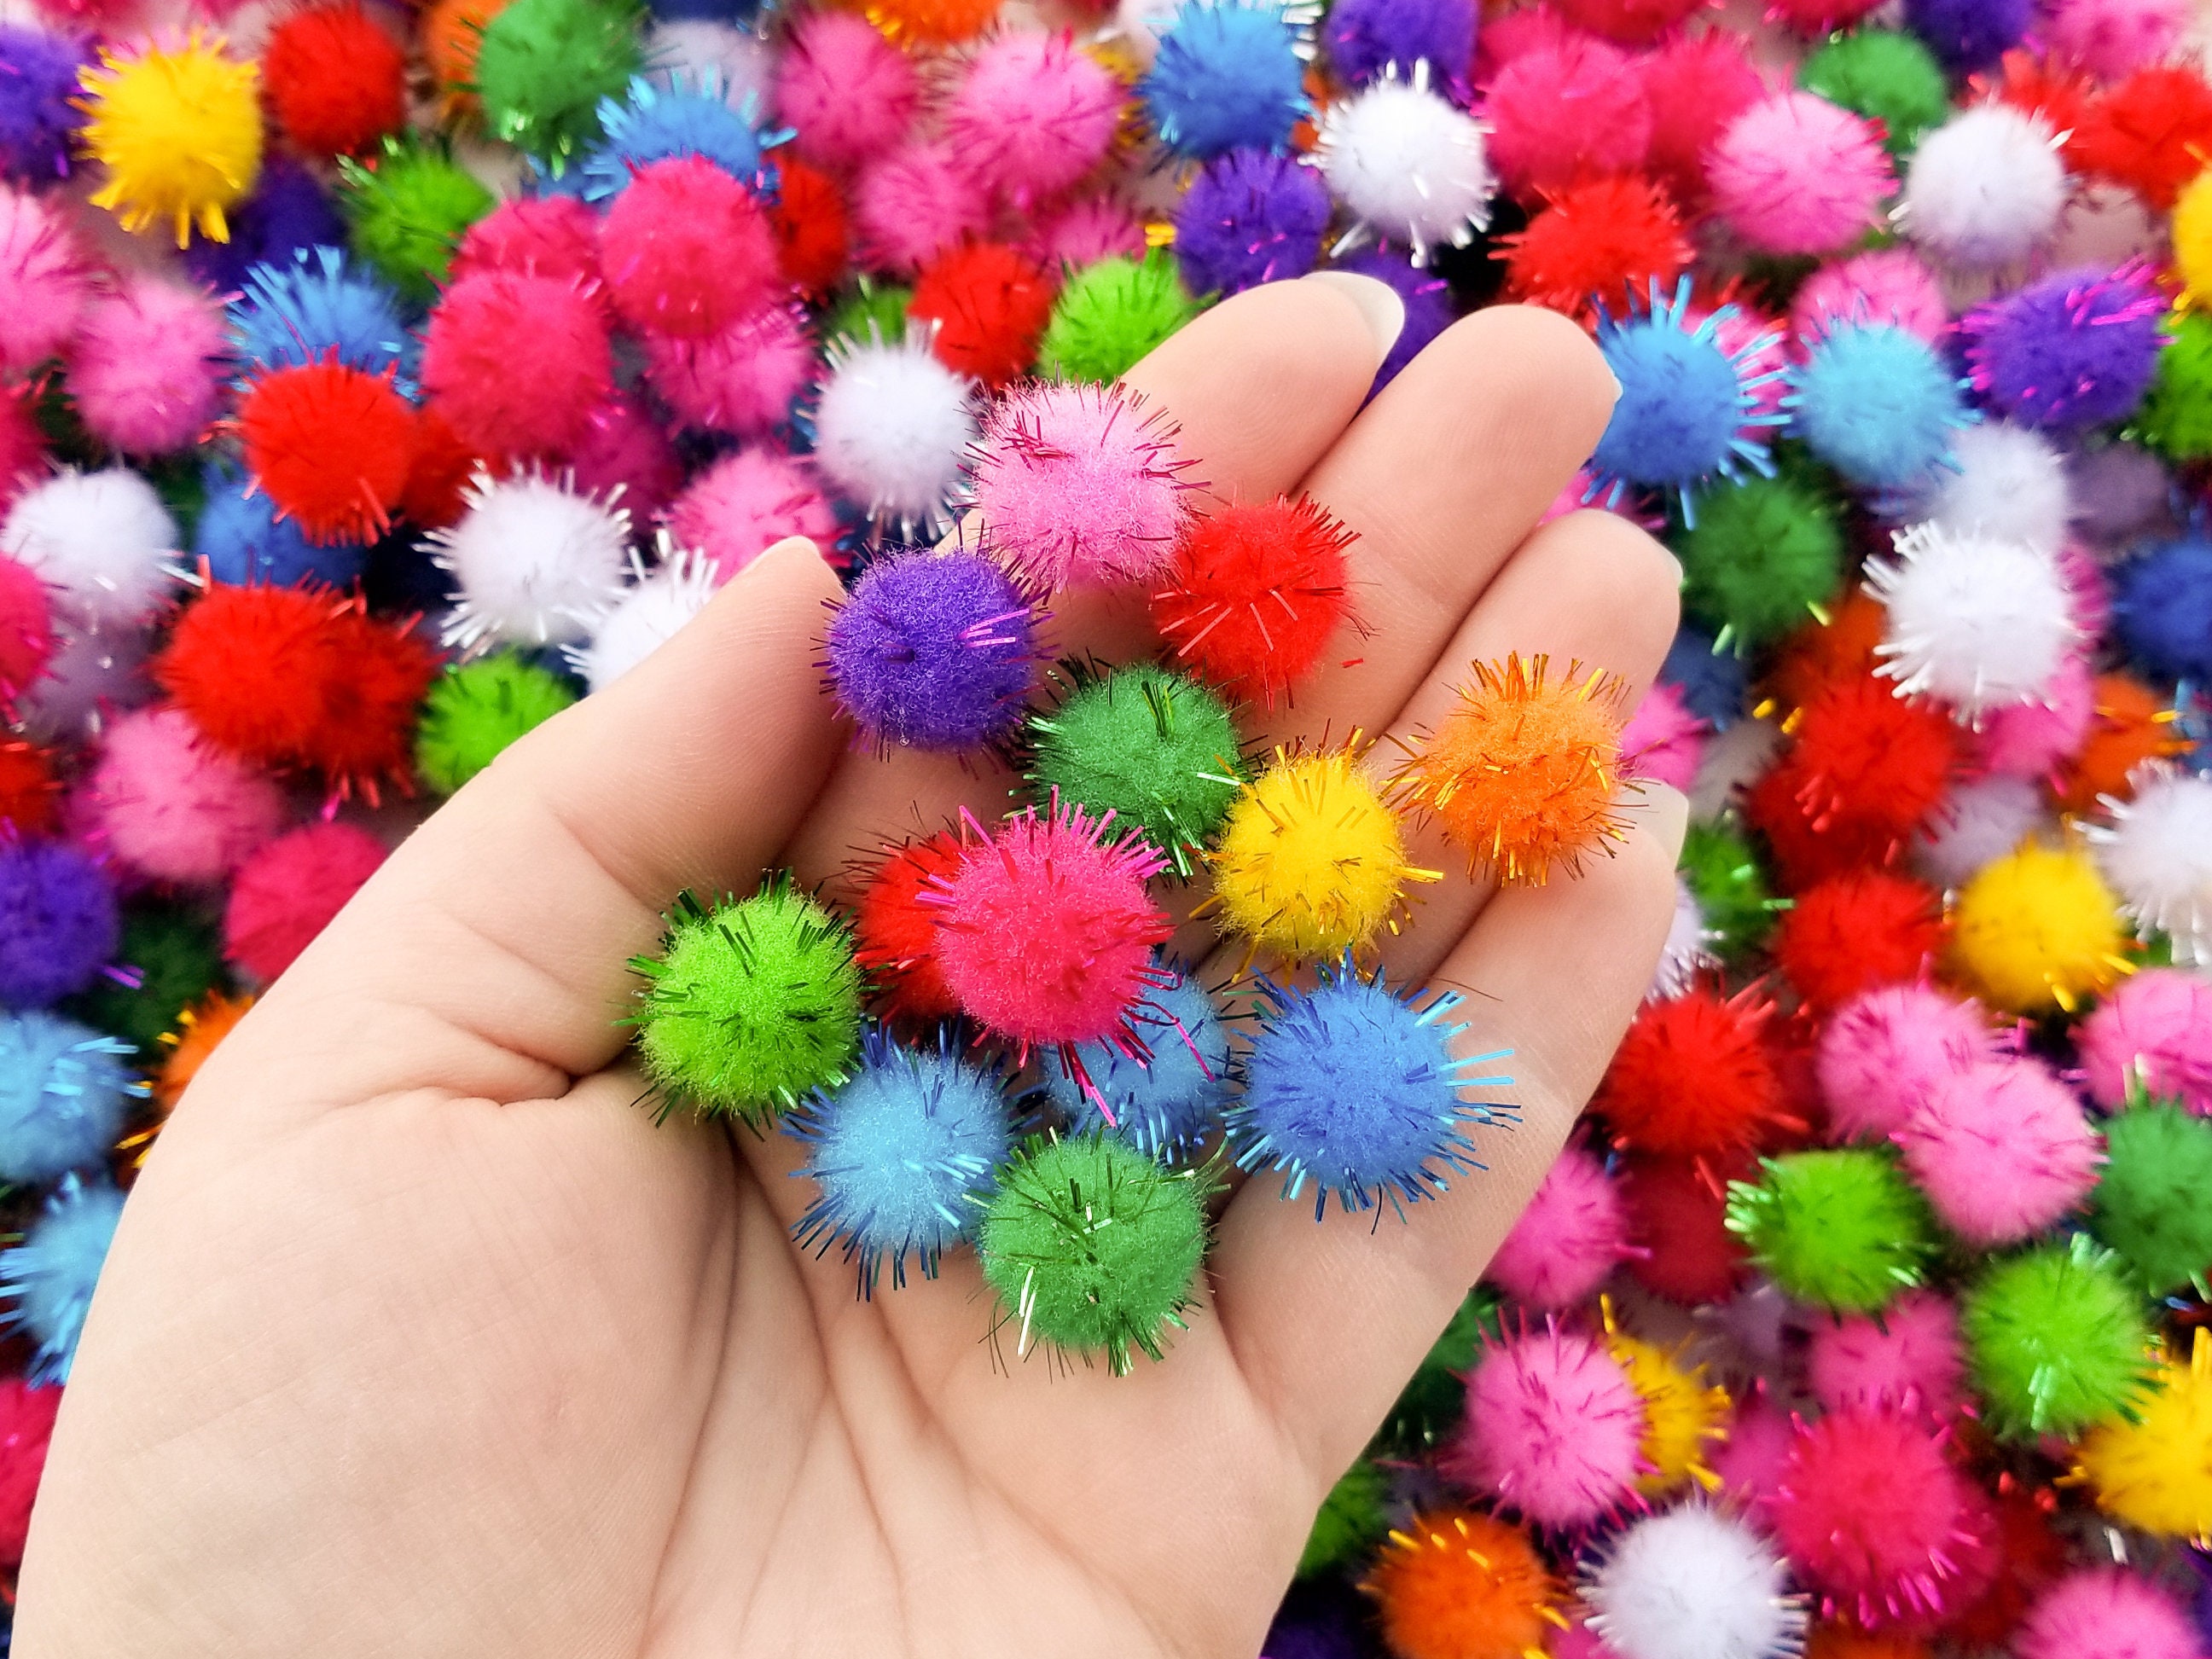 8 mm Approx. 500 Pieces Colourful Mini Pompoms for Crafts Felt